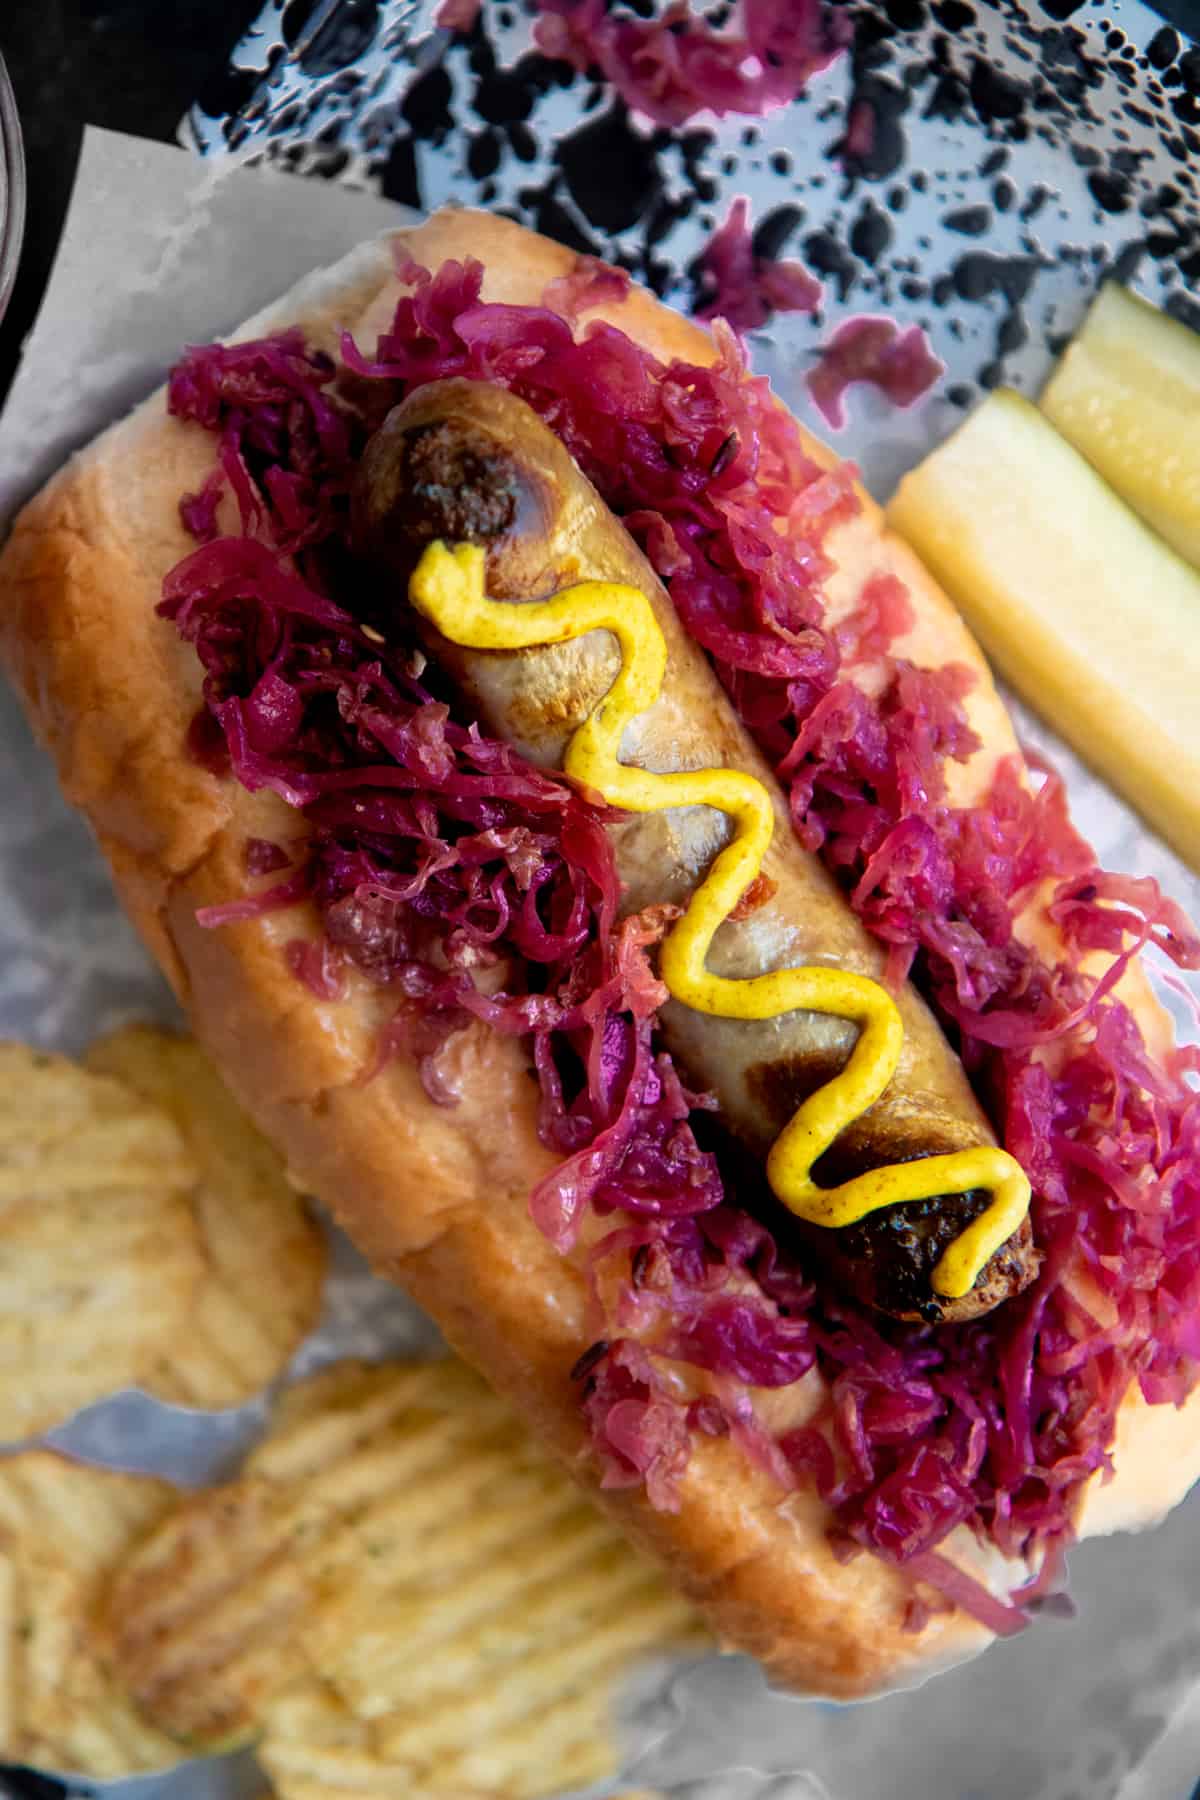 A brat drizzled with mustard sits on a bed of red sauerkraut on top of a bun. Potato chips and a sliced pickle surround the brat.